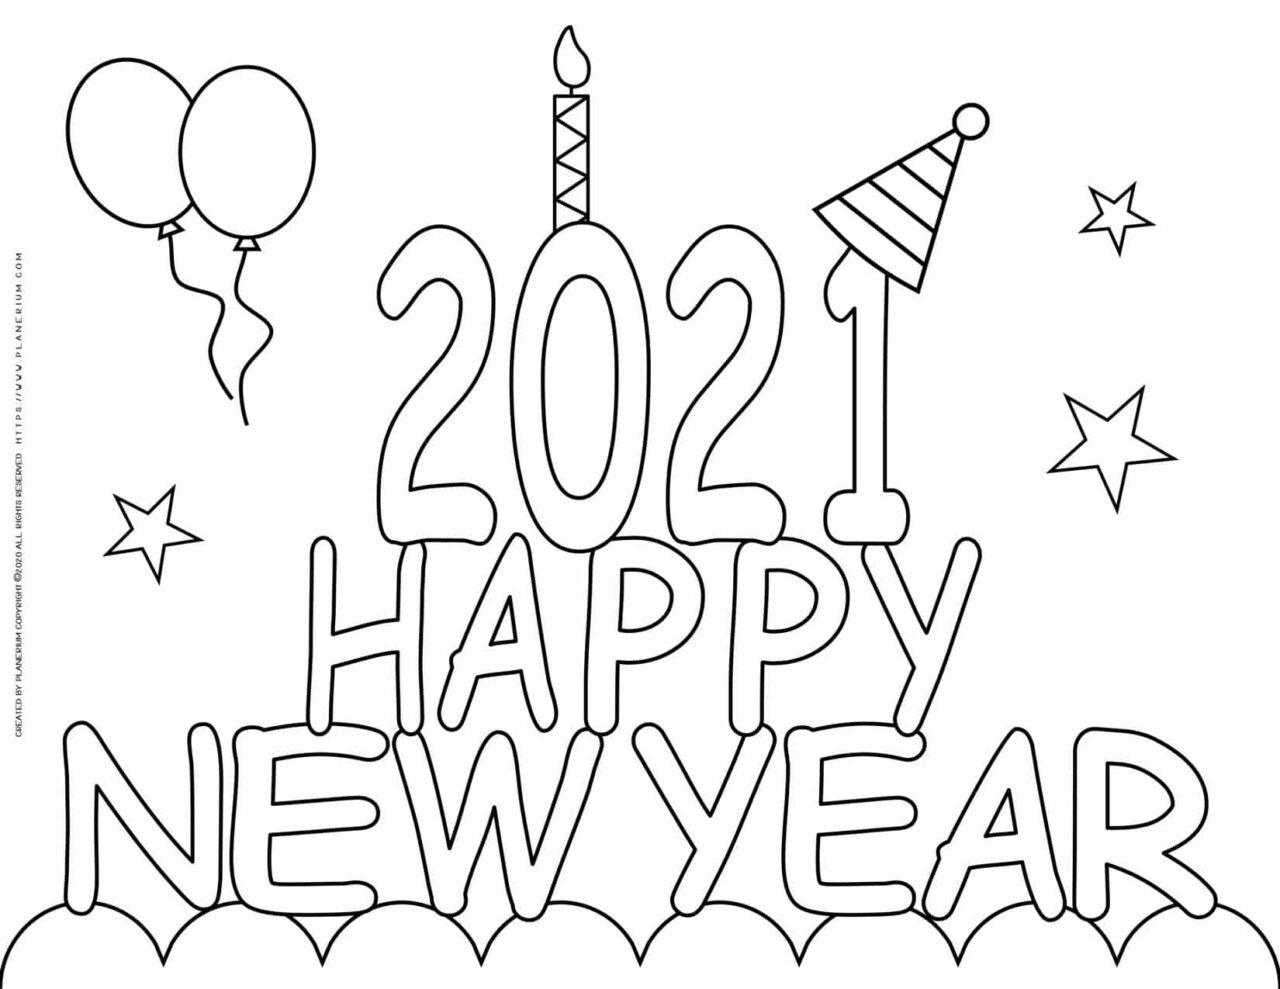 New Year Coloring Pages - 2021 - Happy New Year | Planerium